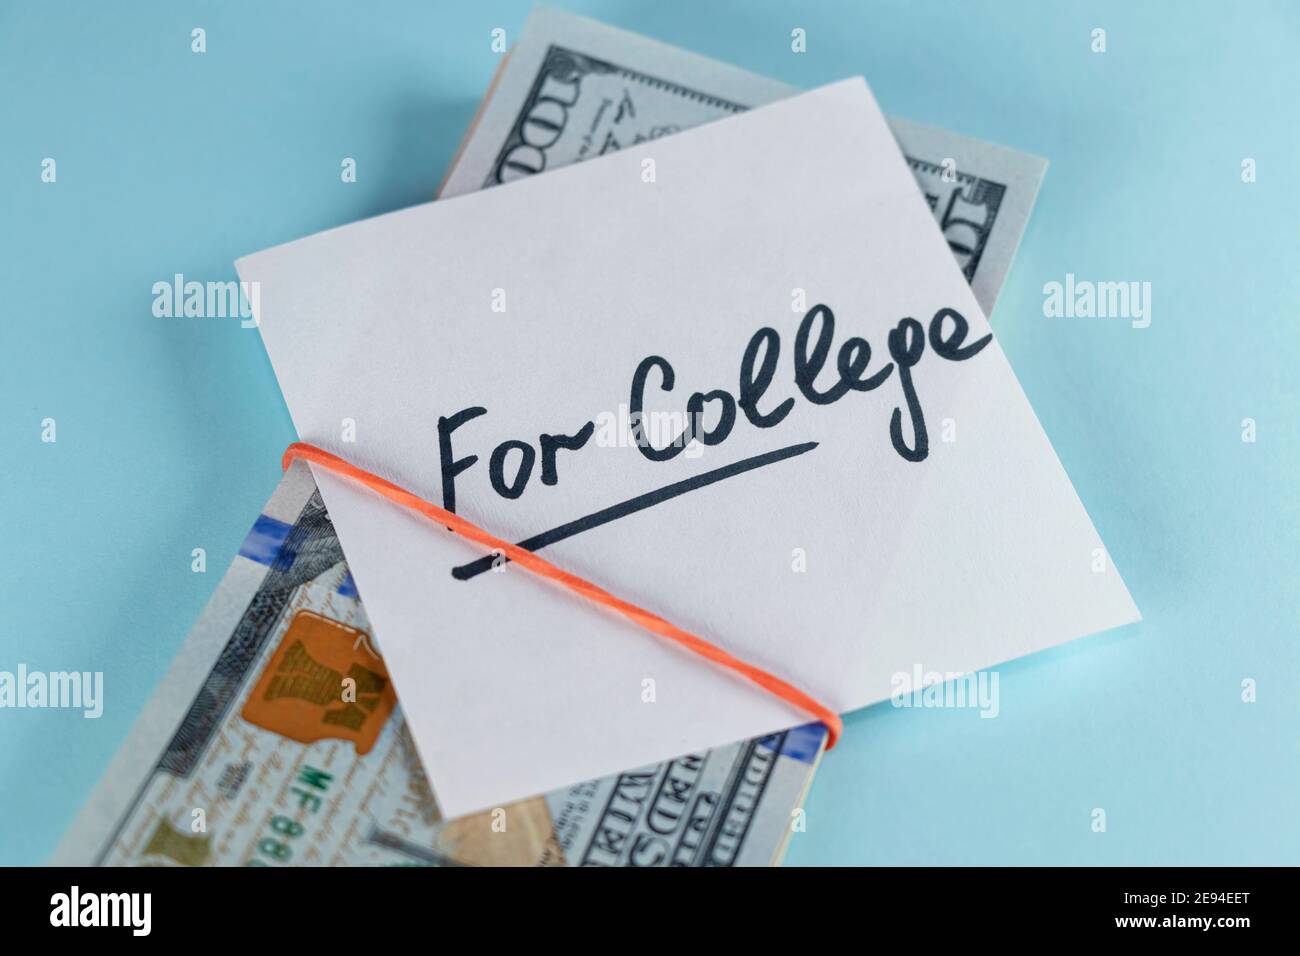 Dollars cash money in rubber band with text written note FOR COLLEGE , on copy space background - concept of financial planning to save money for purp Stock Photo